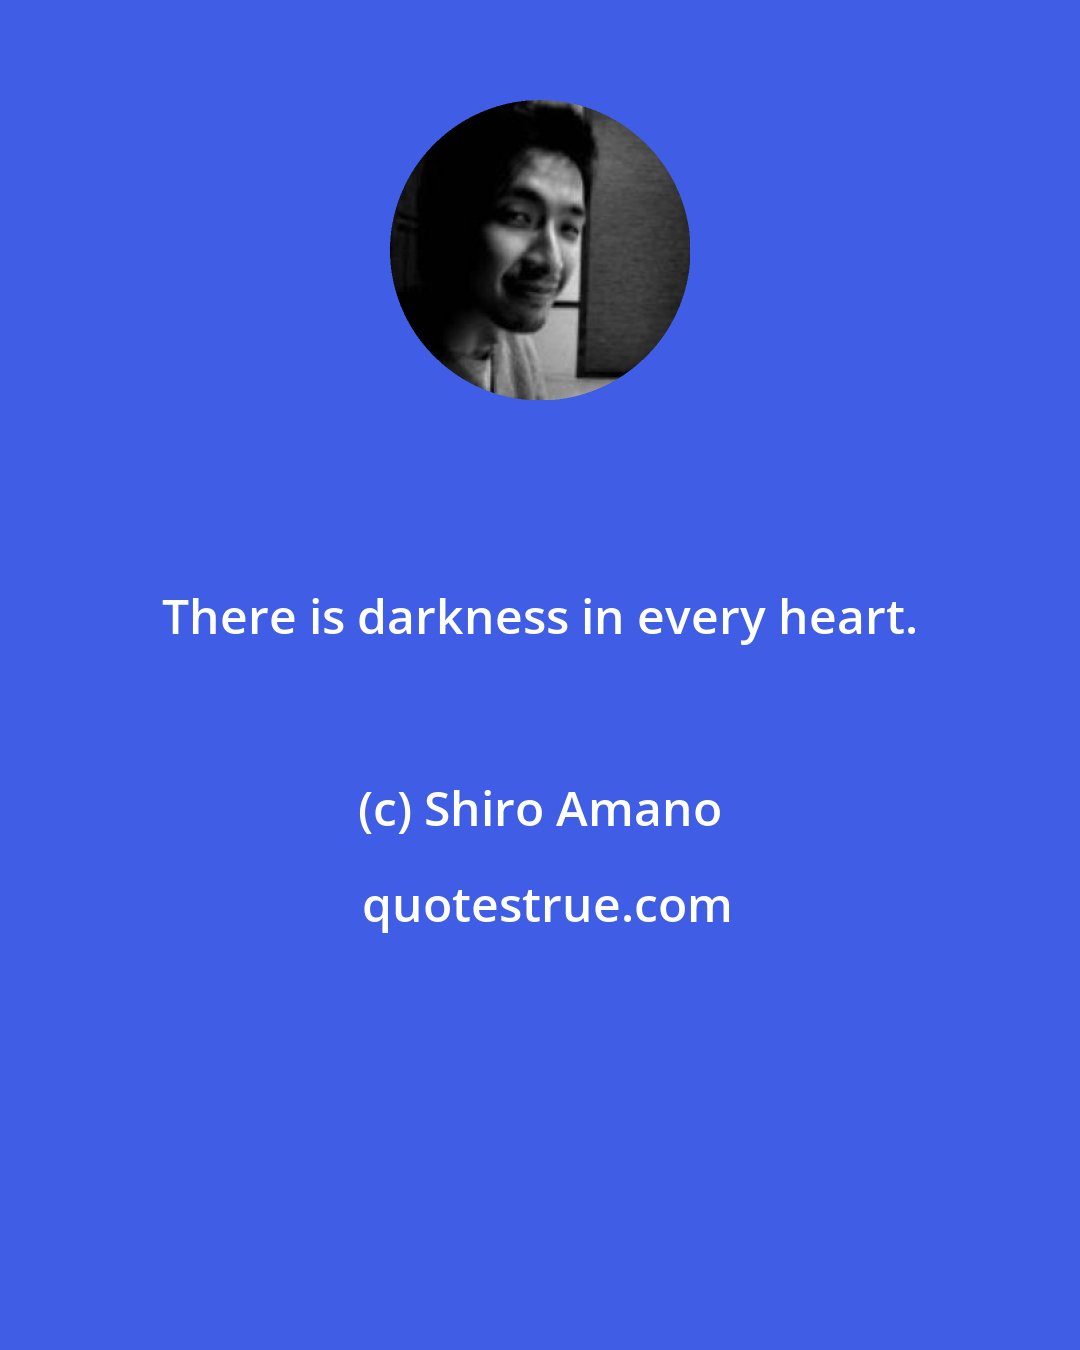 Shiro Amano: There is darkness in every heart.